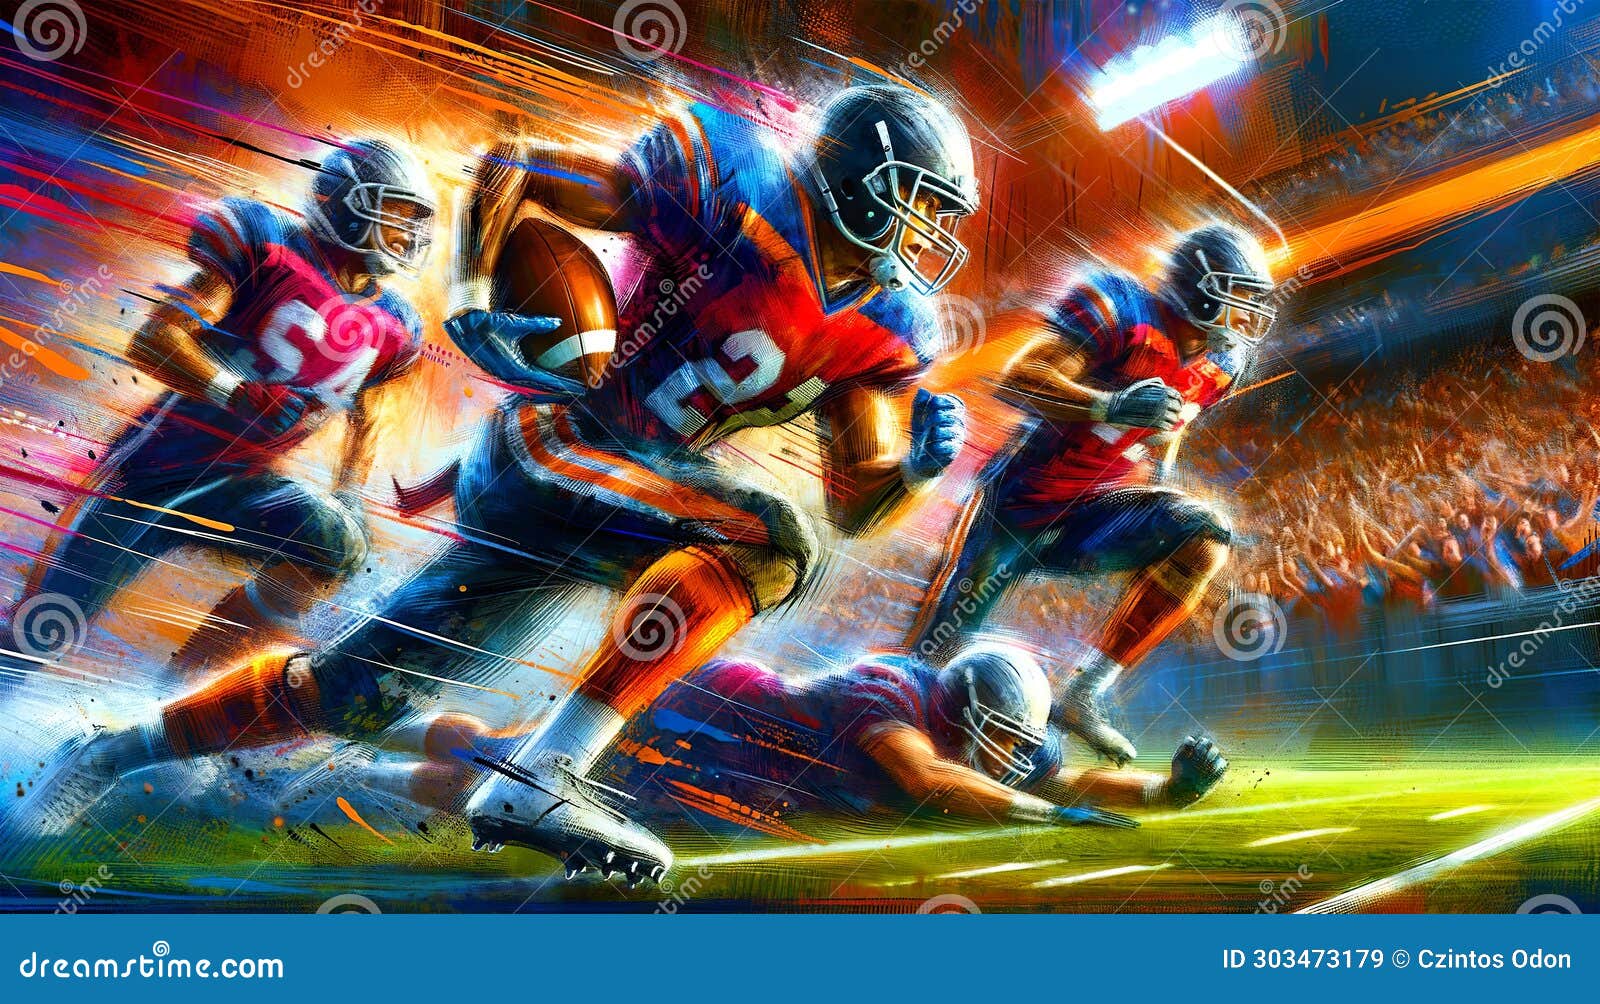 Dynamic, Energetic American Football Players in Mid-action, Vibrant ...